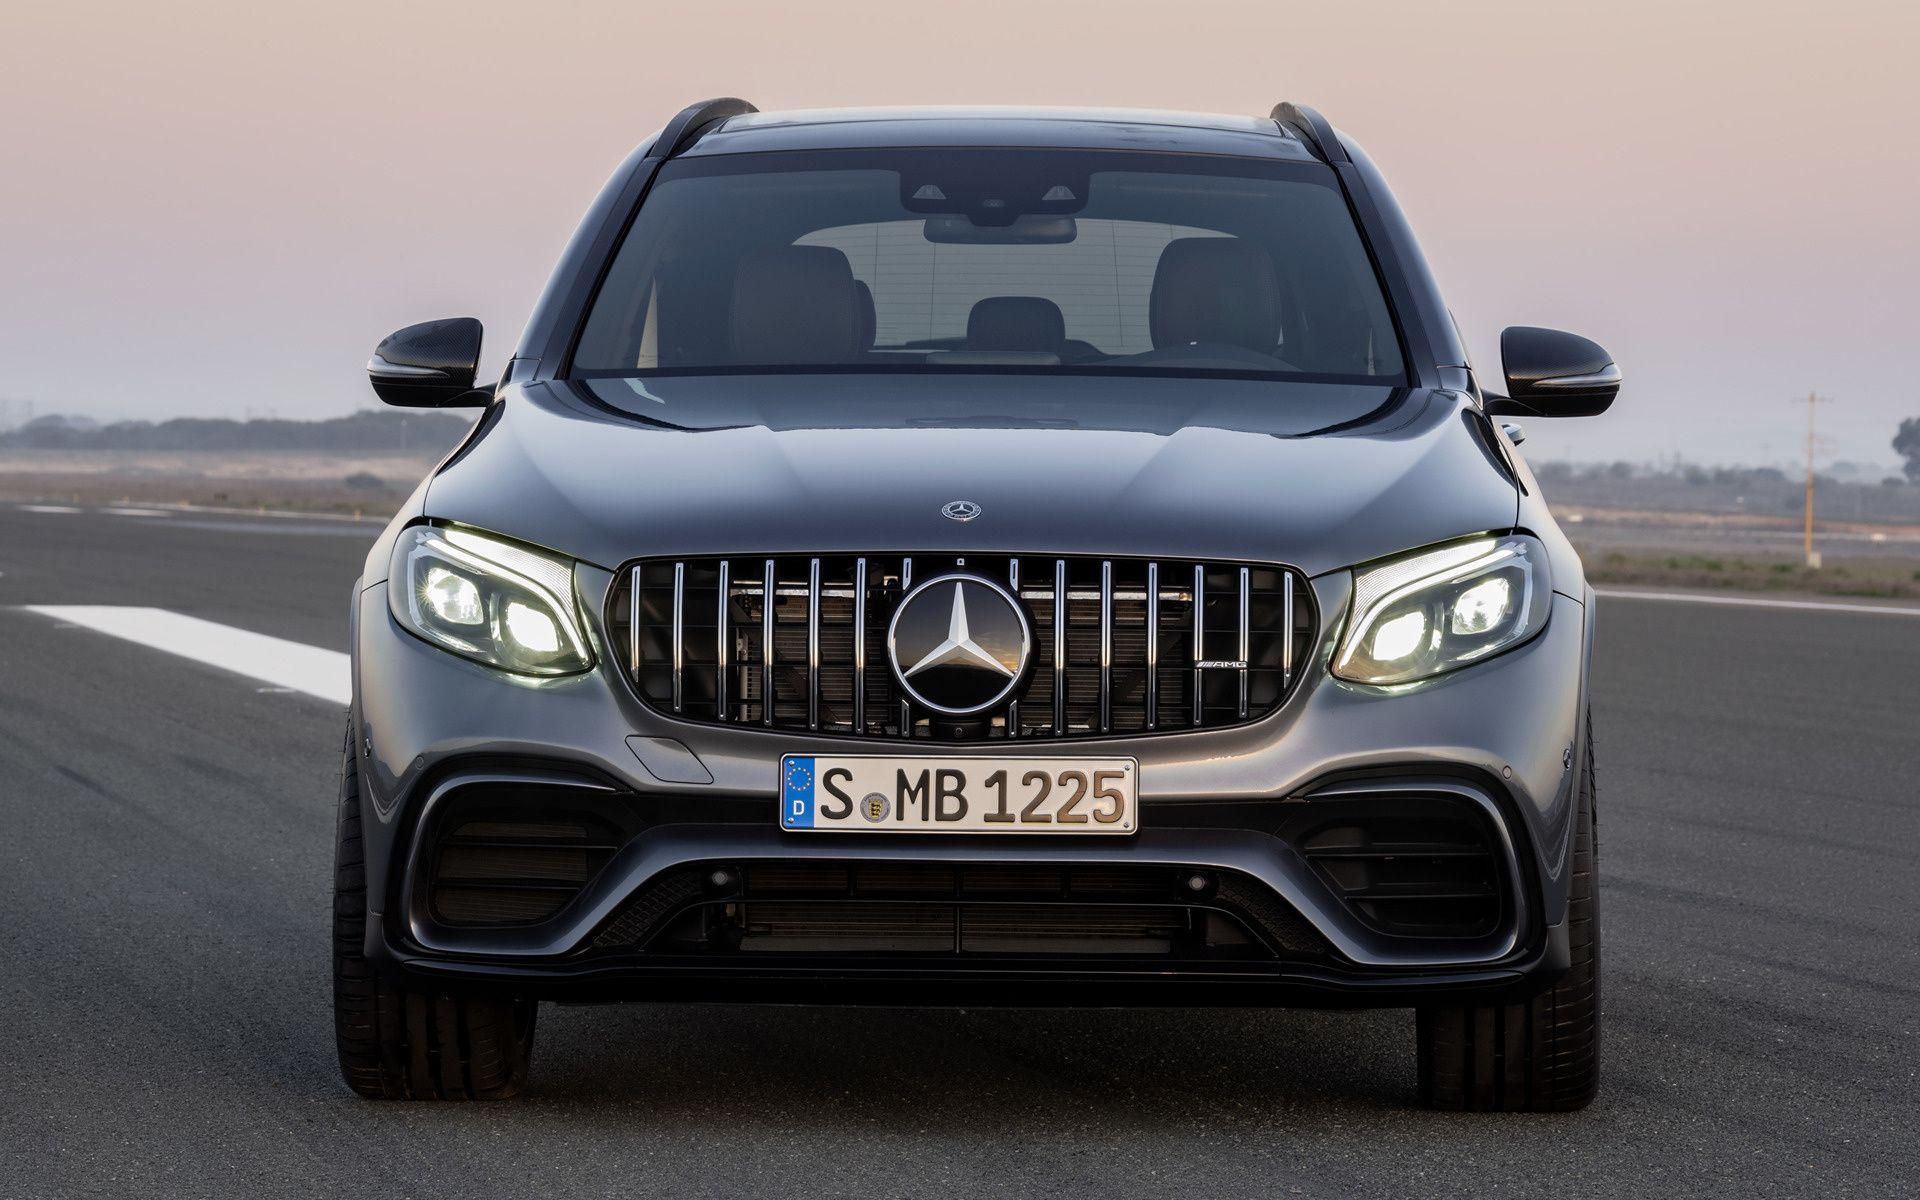 Mercedes AMG GLC 63 S (2017) Wallpaper And HD Image